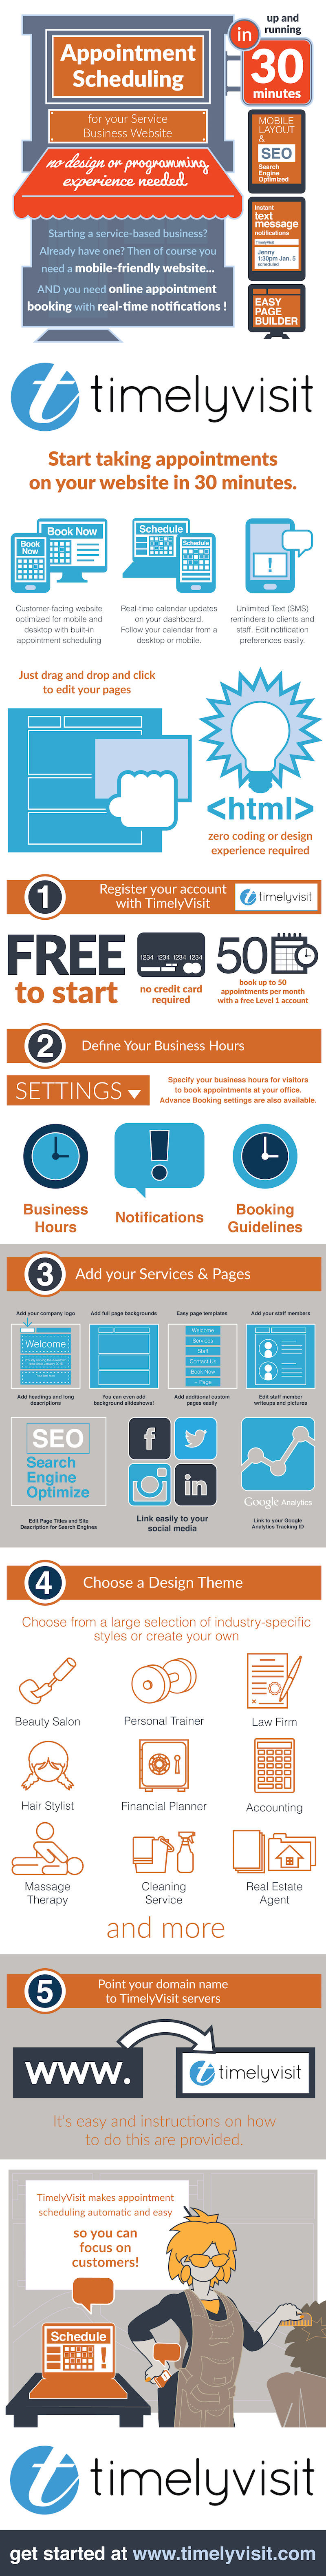 How To Create A Website For Your Service Business In 30 Minutes (infographic)